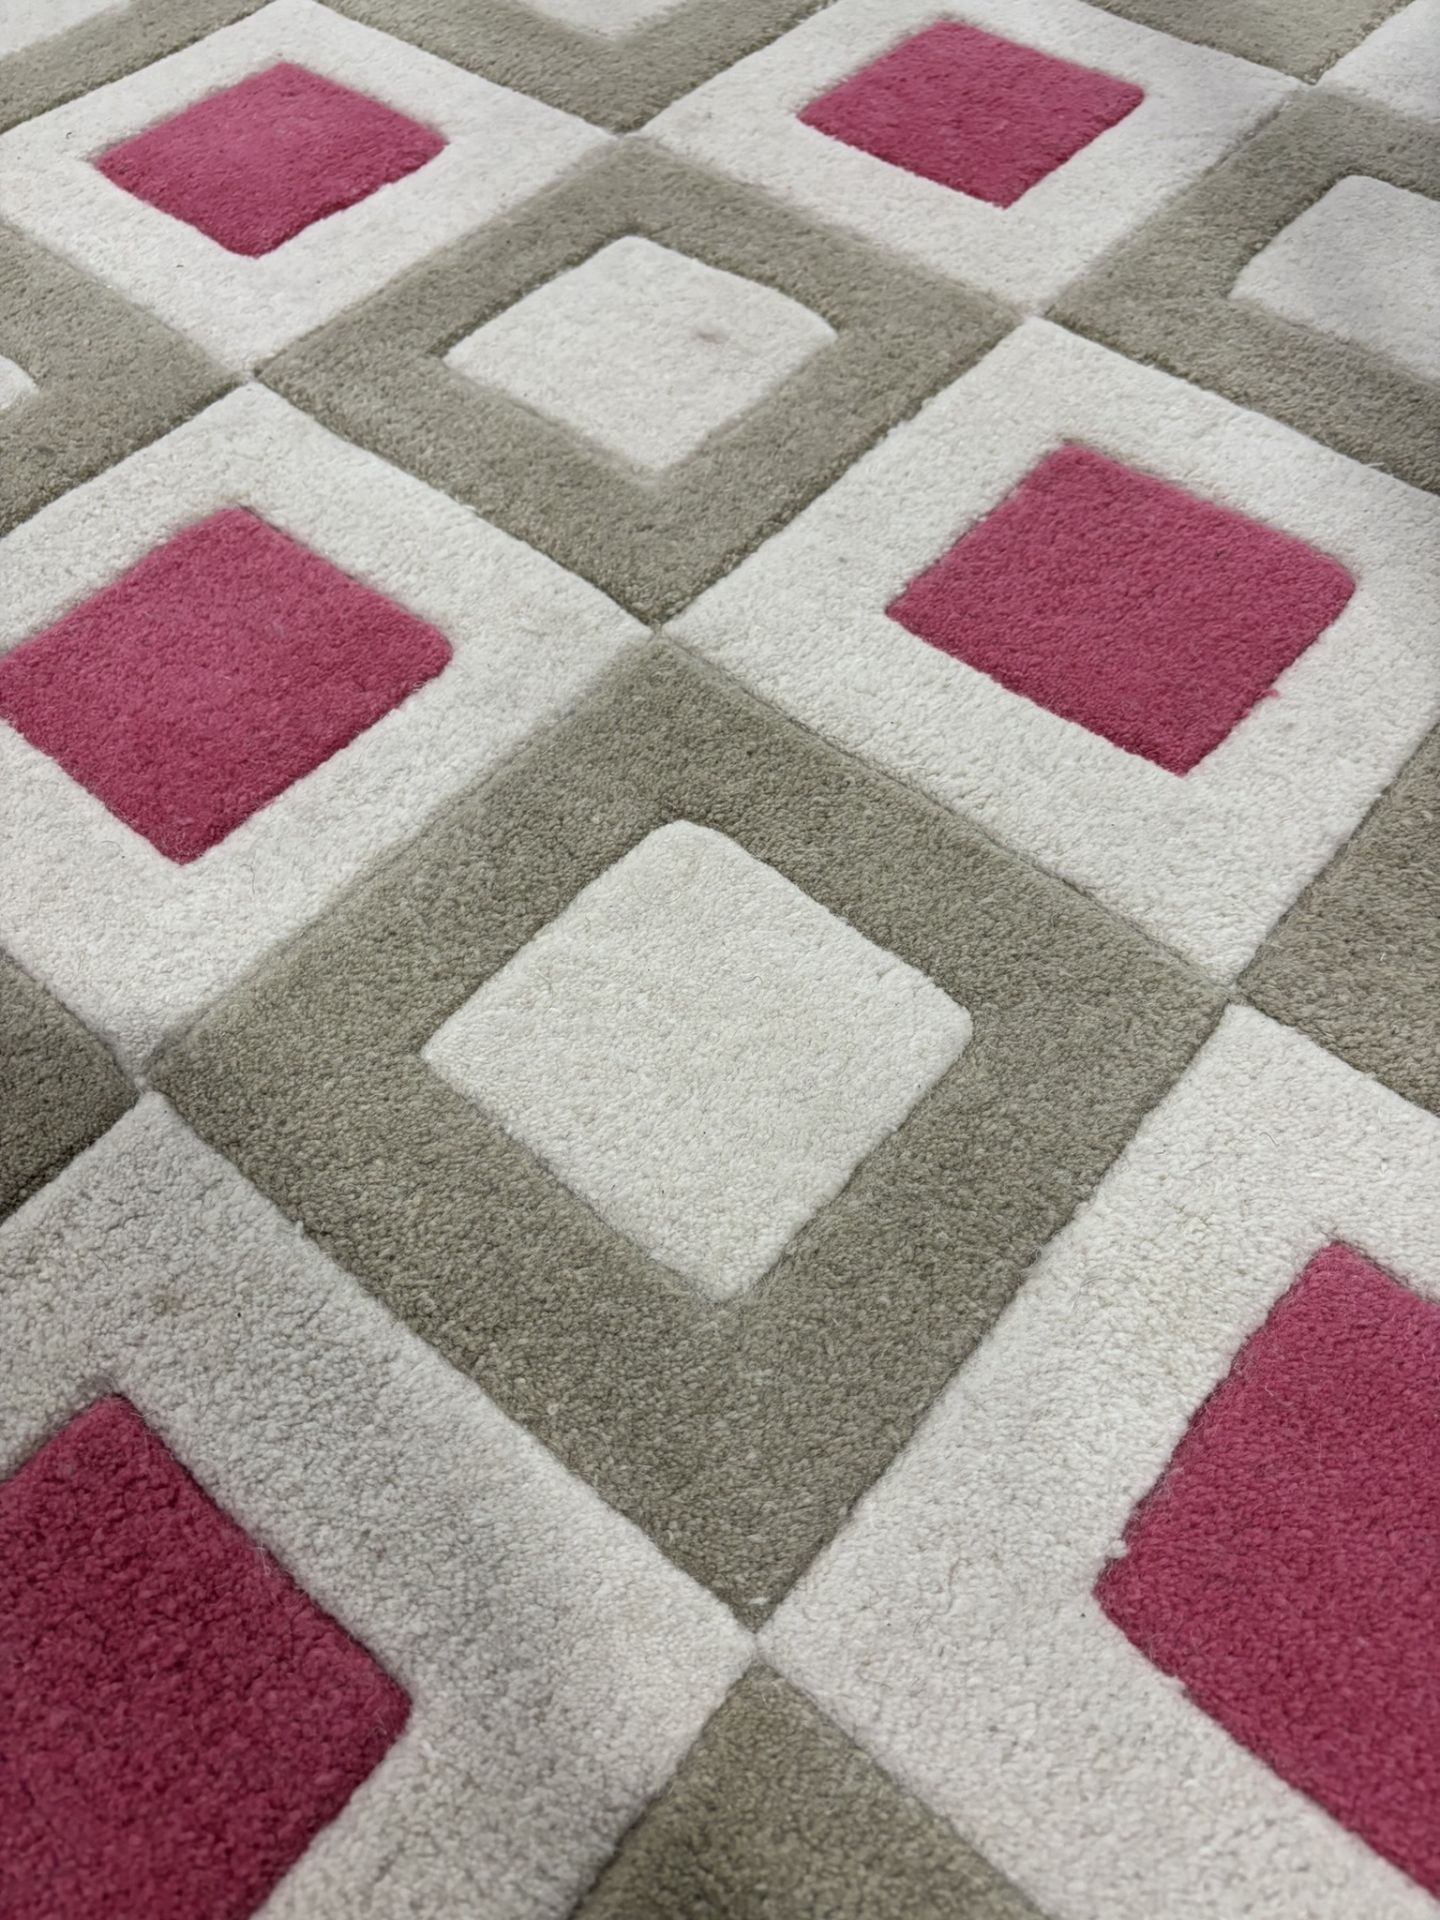 Ex-Display Pink/Beige Square Pattern Dry Washed Indian Rug - Image 2 of 5